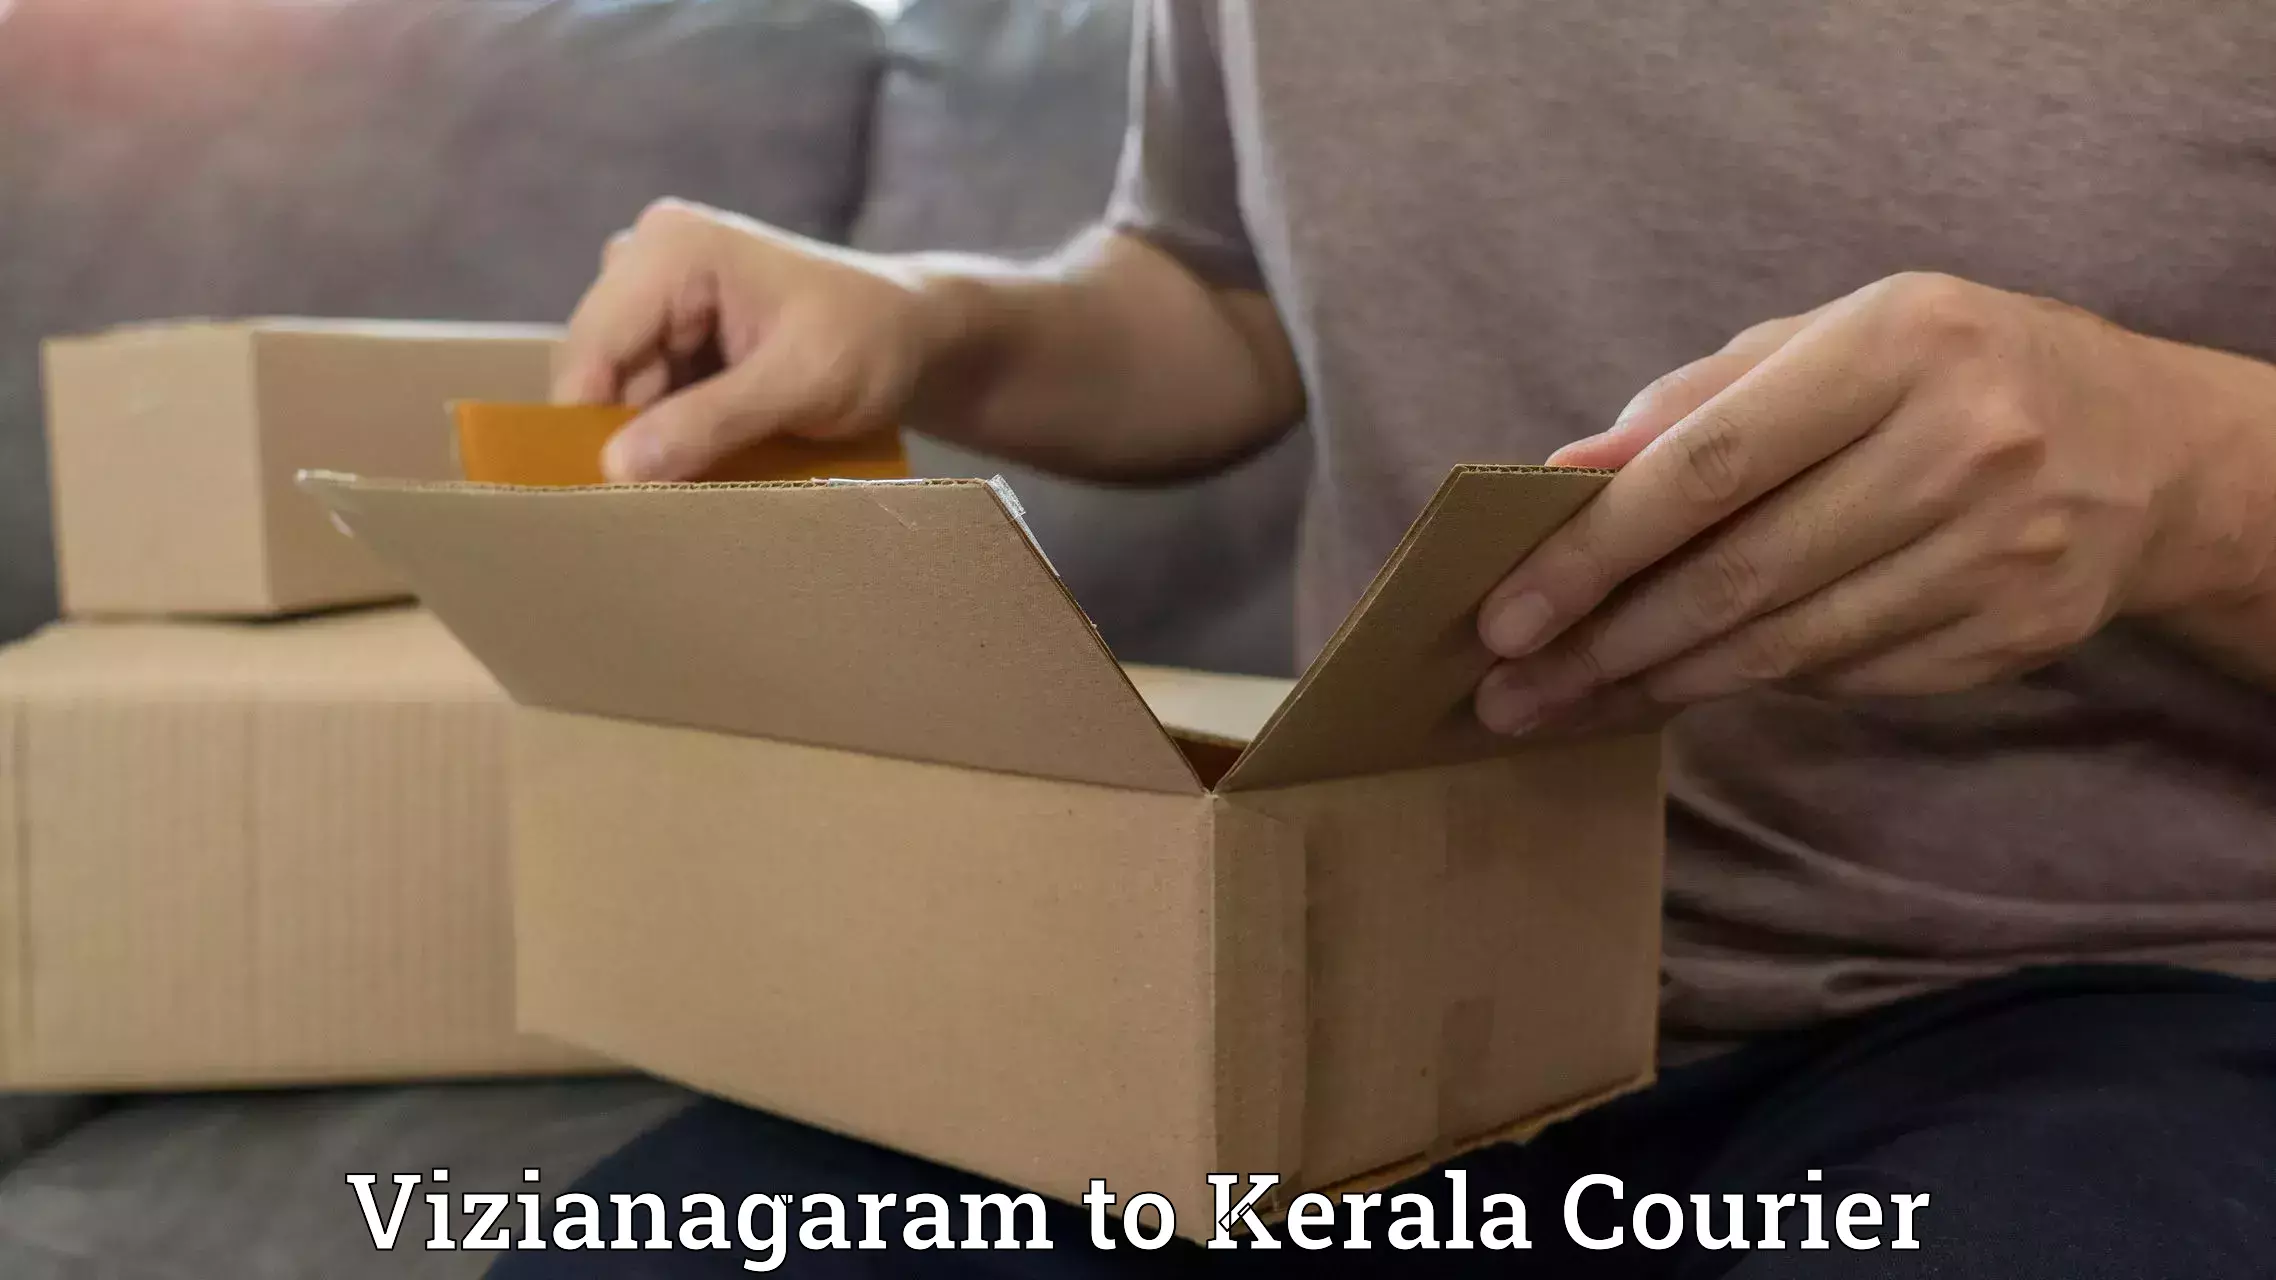 Express package handling Vizianagaram to Cochin University of Science and Technology